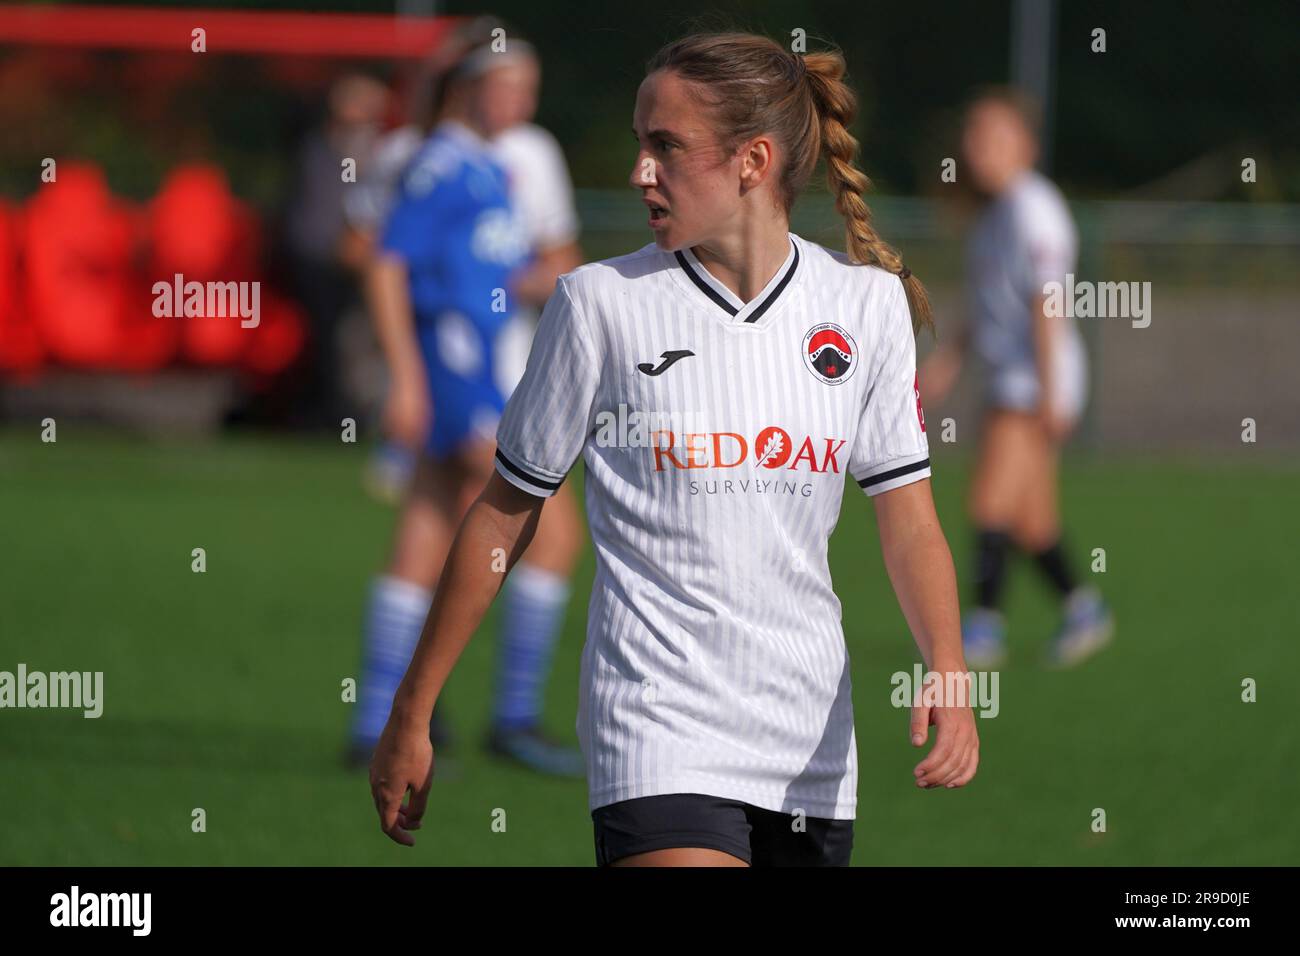 Olivia Liv Francis on action for Pontypridd United FC Women in the Genero Adran premier league Stock Photo